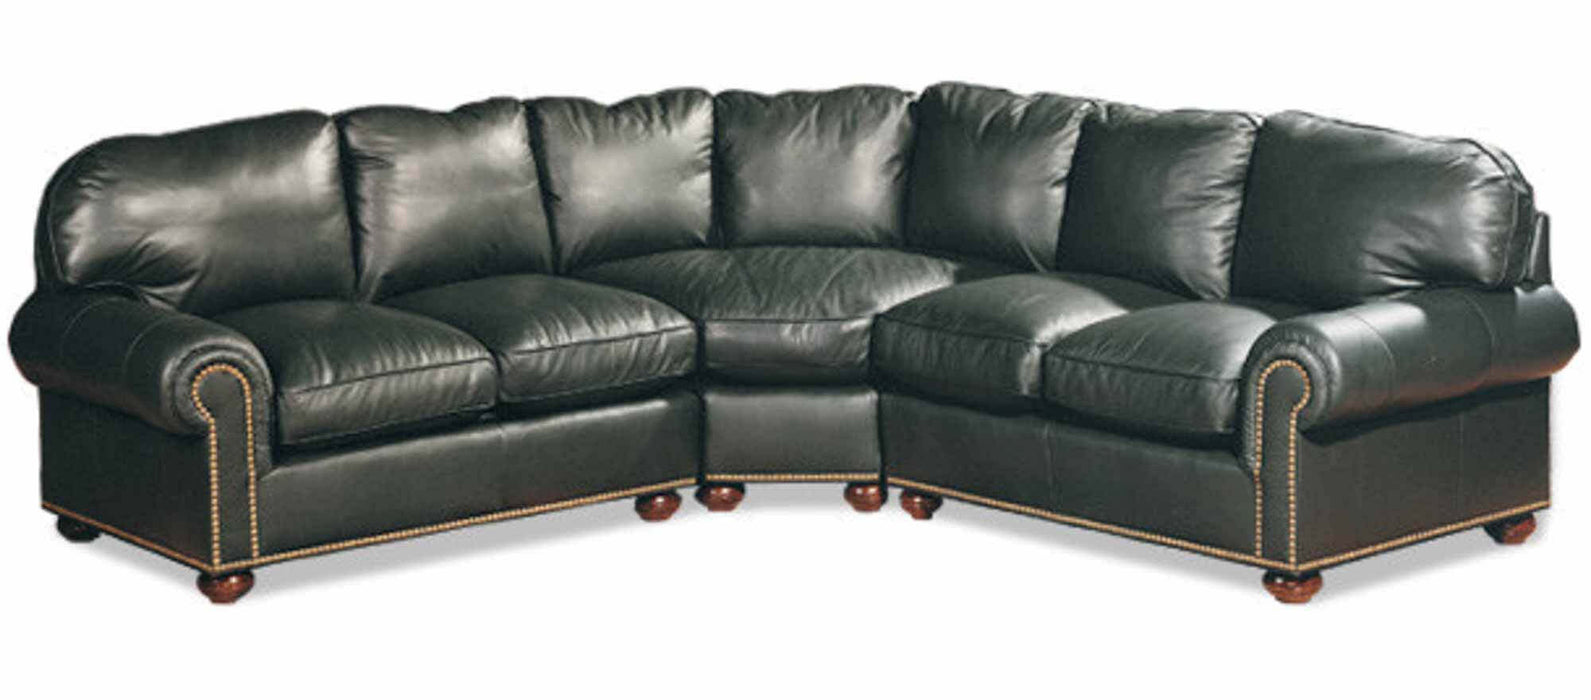 Stratton Leather Sectional